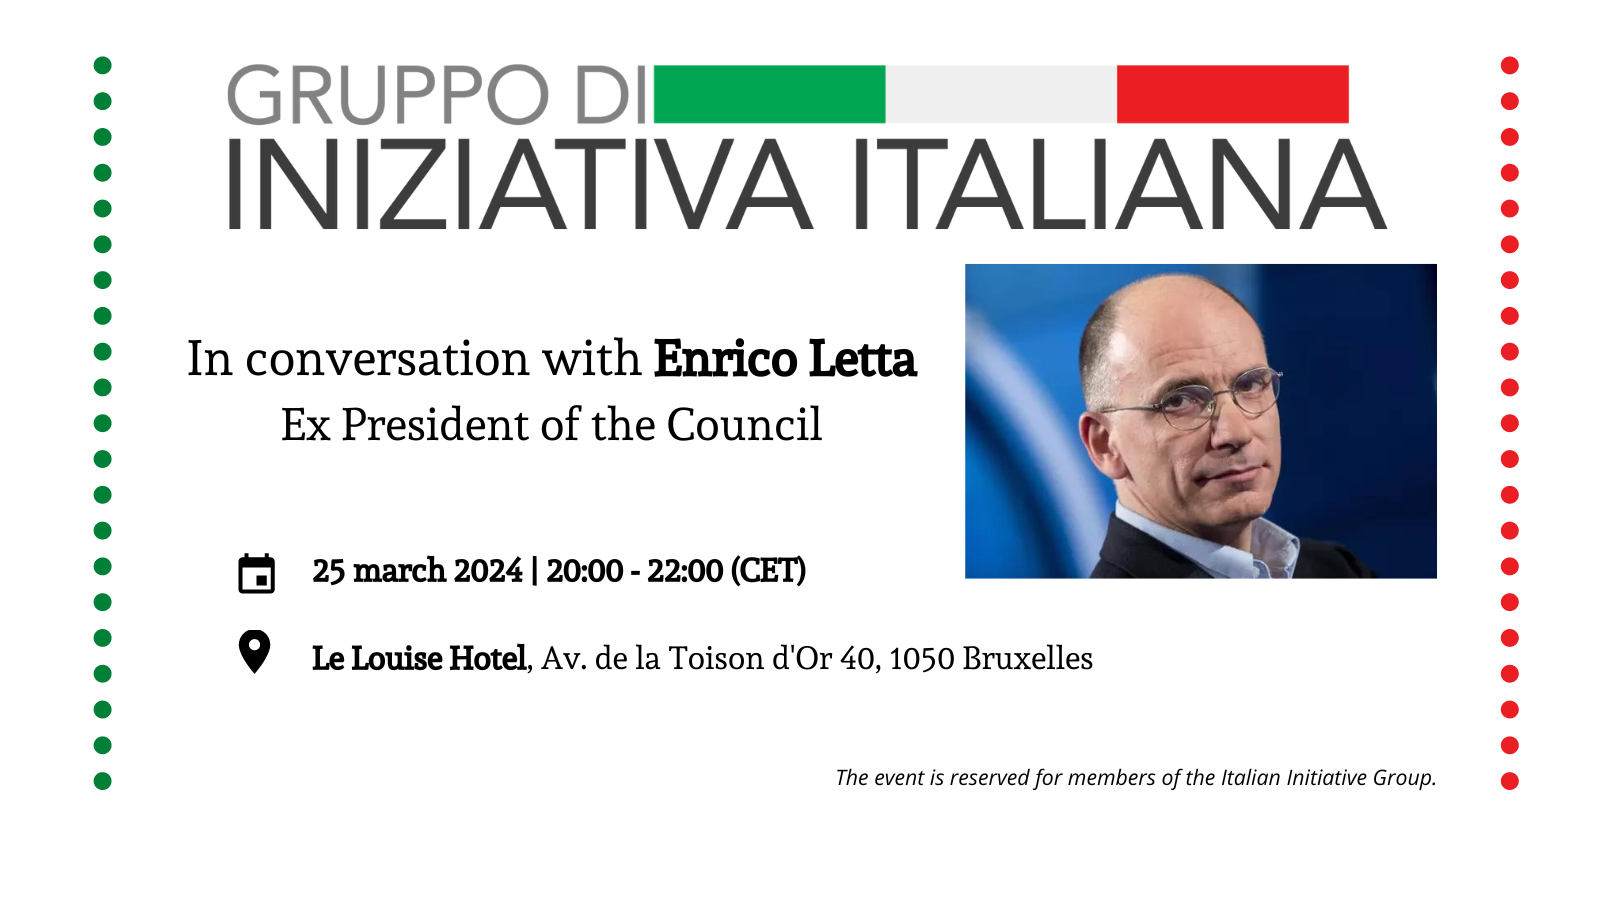 In conversation with Enrico Letta | Ex President of the Council